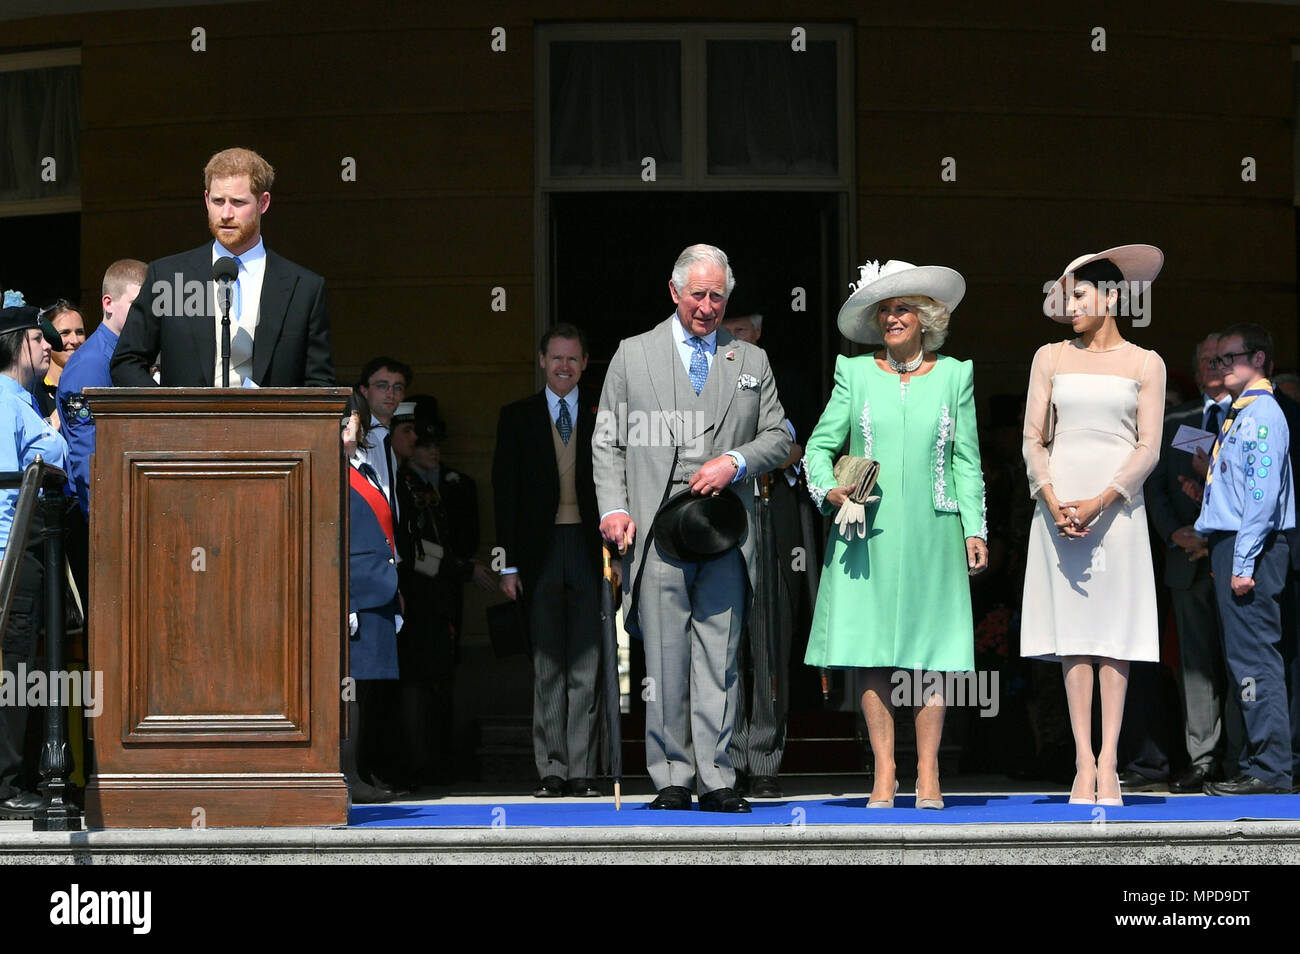 The Prince of Wales, the Duchess of Cornwall and the Duchess of Sussex, listen as the Duke of Sussex speaks during a garden party at Buckingham Palace in London, which the newly weds are attending as their first royal engagement as a married couple. Stock Photo